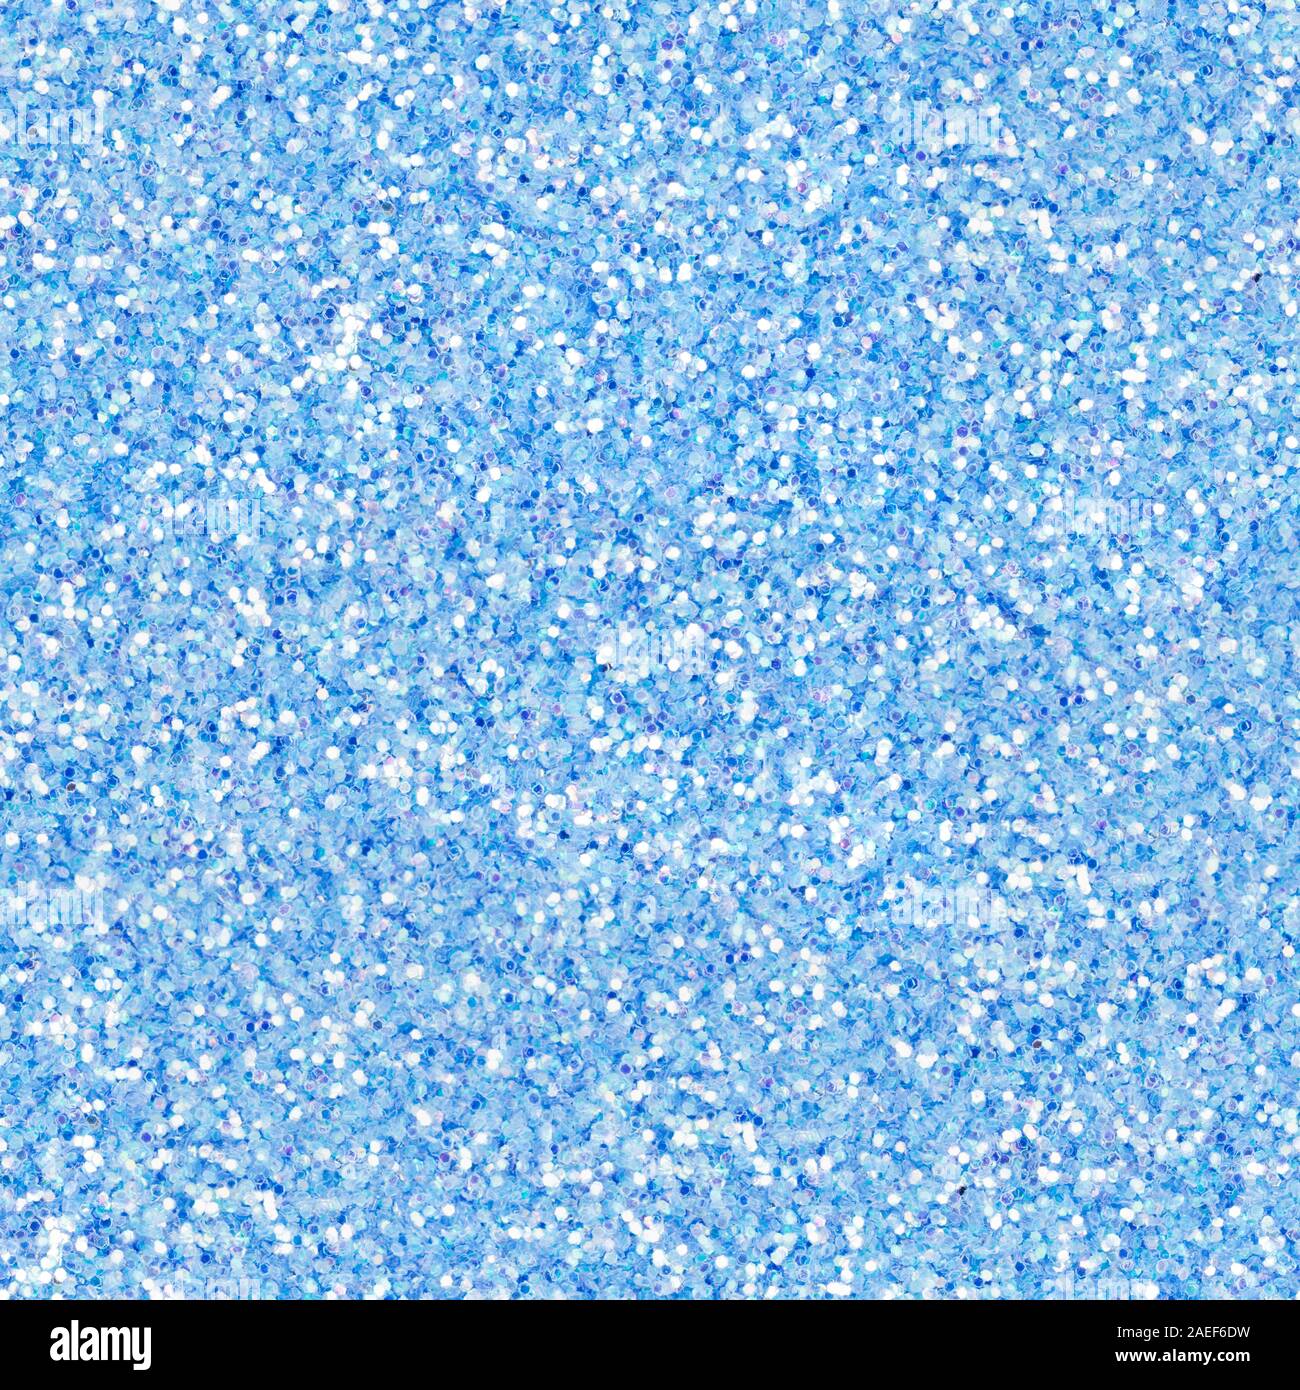 Bright light blue glitter, sparkle confetti texture. Christmas abstract background, seamless pattern. Stock Photo